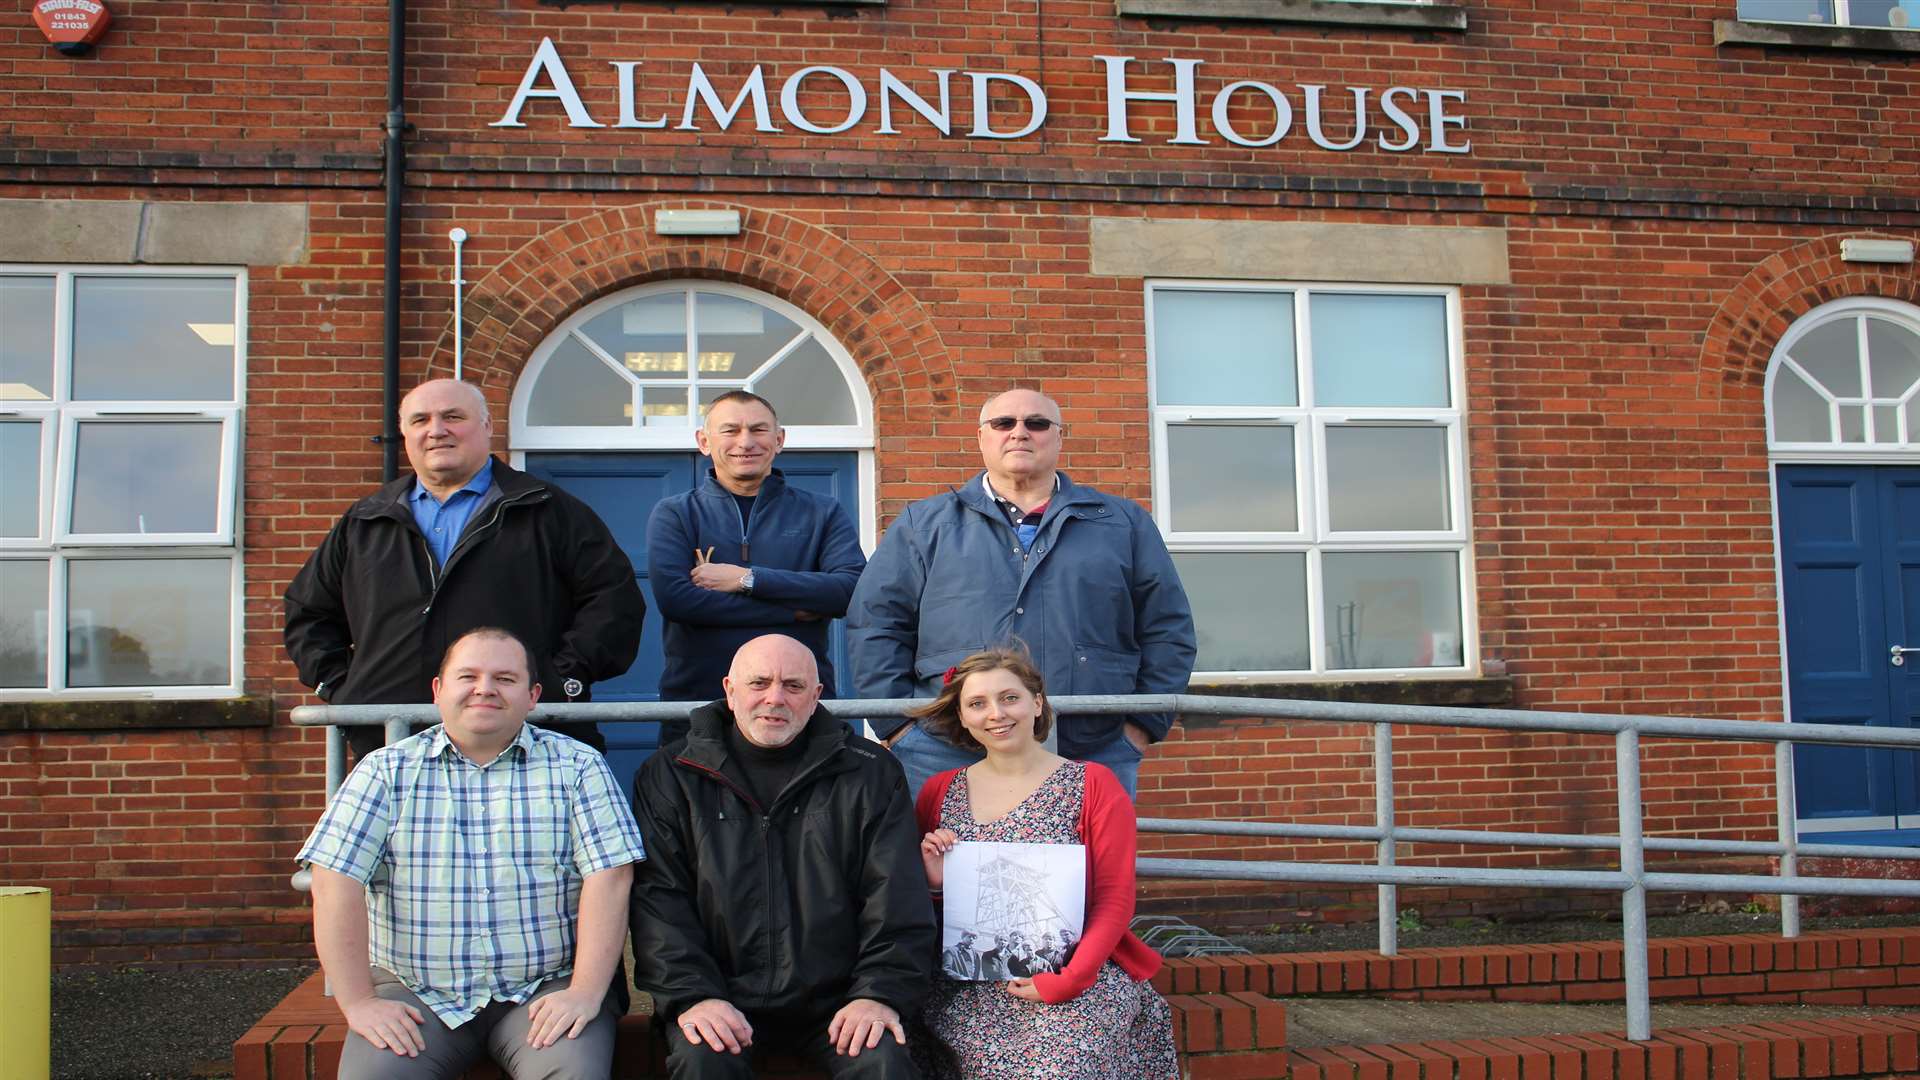 Reunion at Almond House, Betteshanger. (Back row (L-R): Andrew Inglis (ex-miner), Brian Hood (ex-miner), John Inglis (ex-miner). Front row (L-R): Darran Cowd (Museum and Heritage Manager, Kent Mining Museum; Mike Dugdale (photographer), Madeline Outen (Community Curator, Kent Mining Museum).